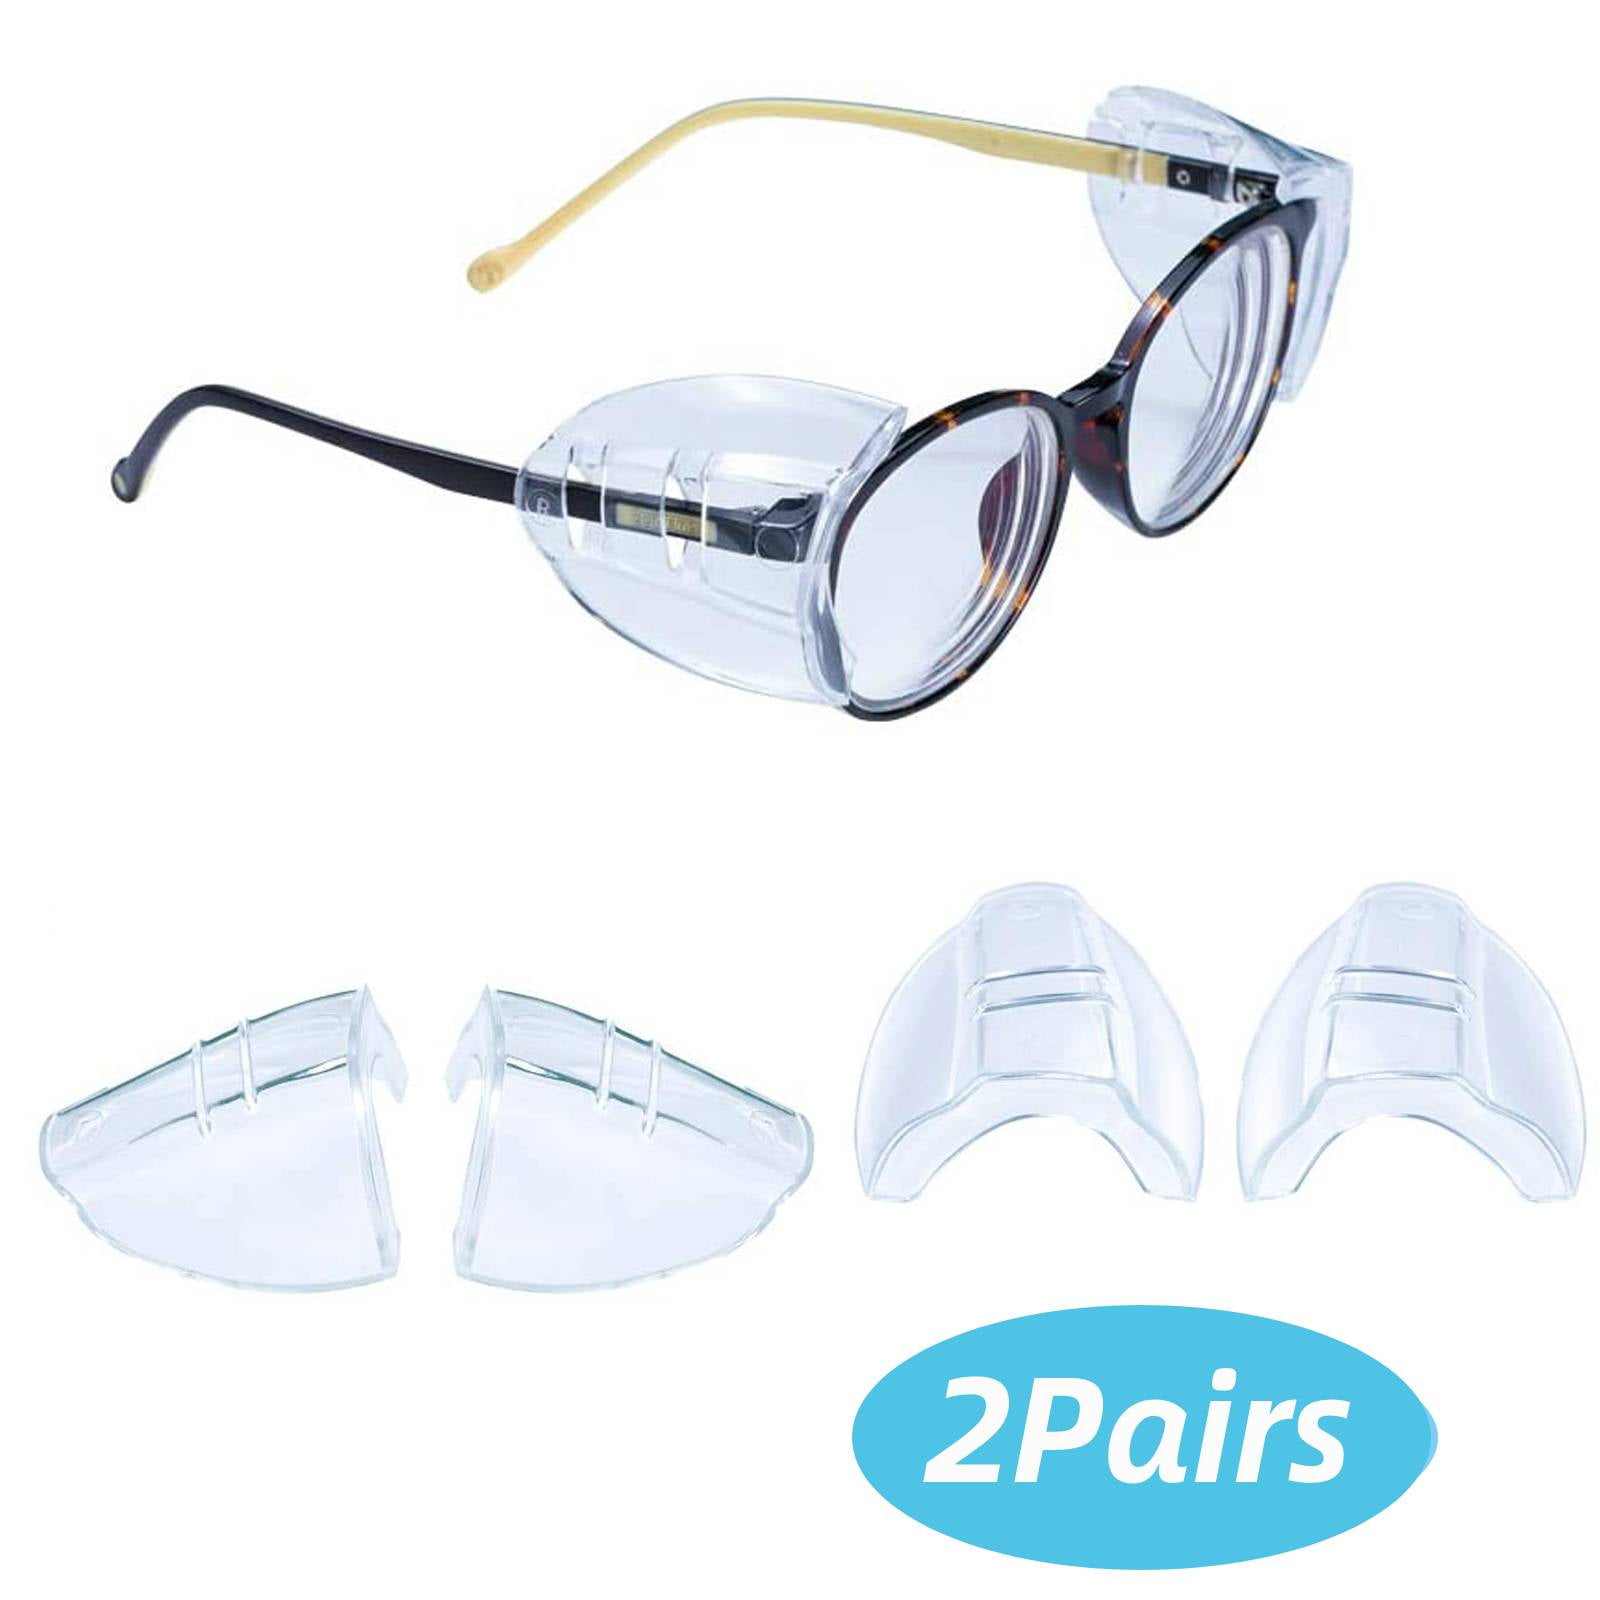 All-Purpose Safety Glasses With Protective Side Shield Smoke 